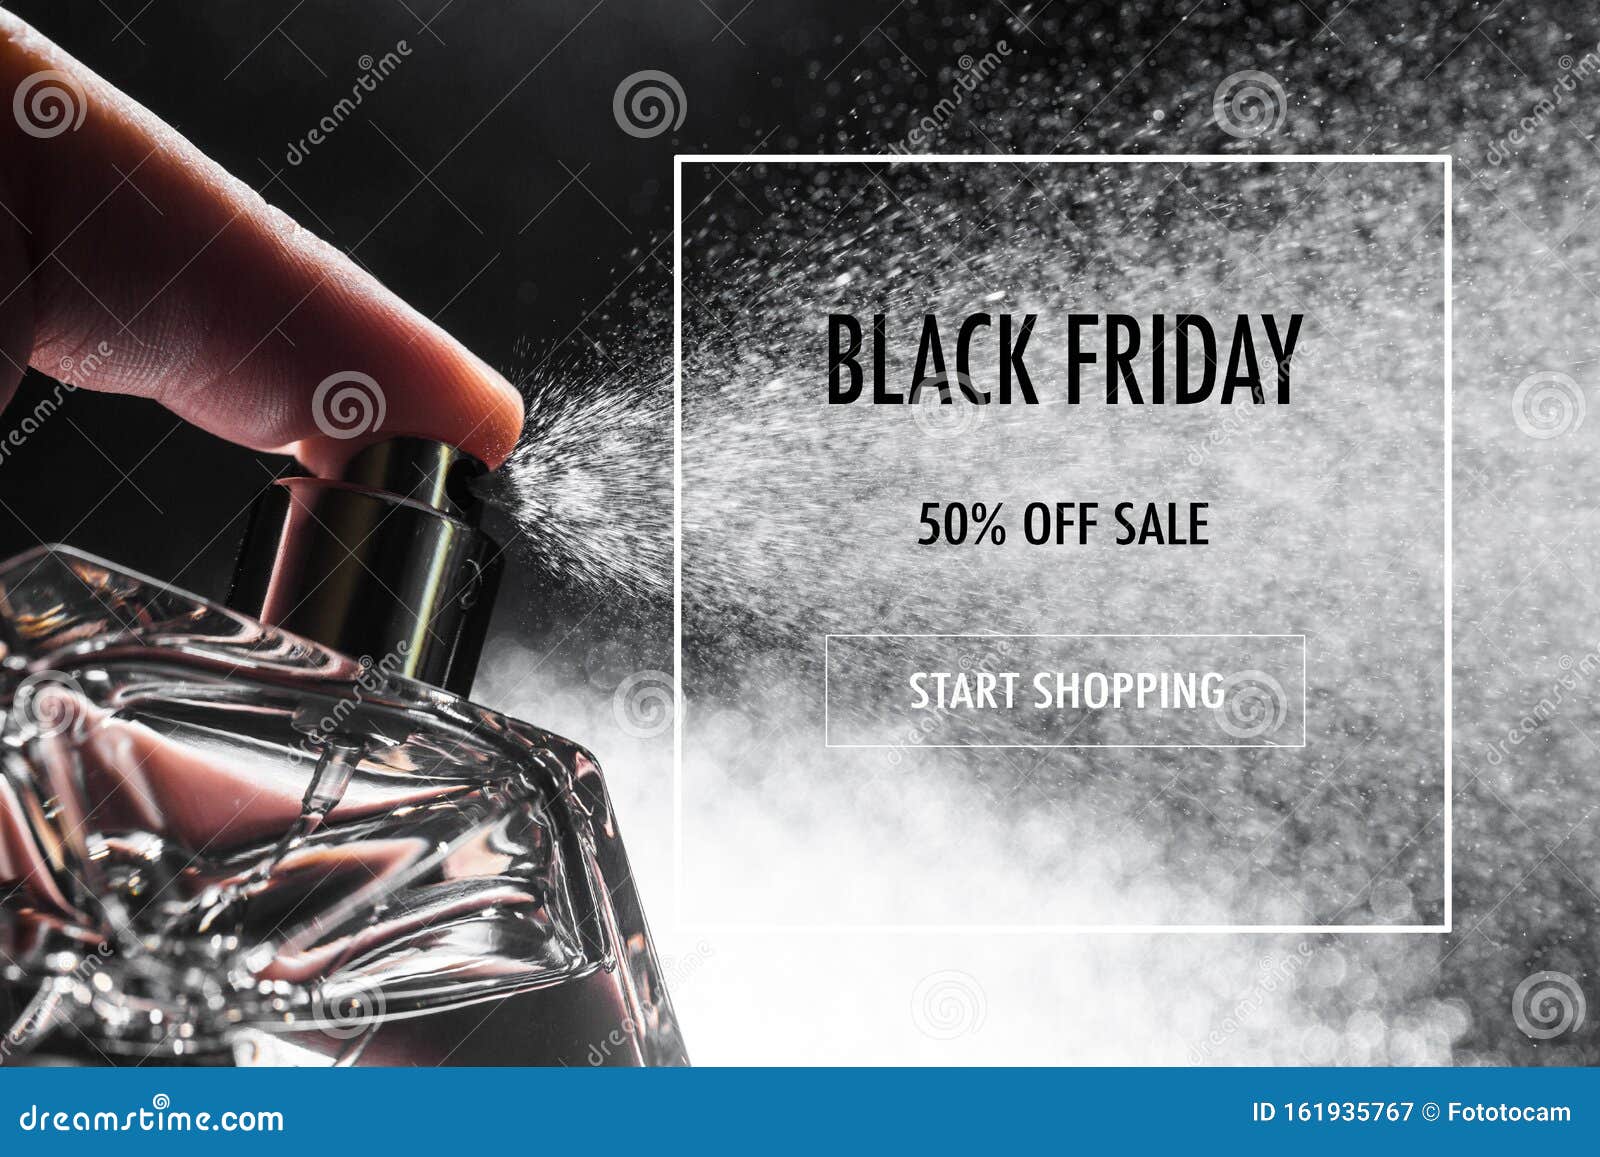 Black Perfume Stock - Free & Royalty-Free Stock Photos from Dreamstime